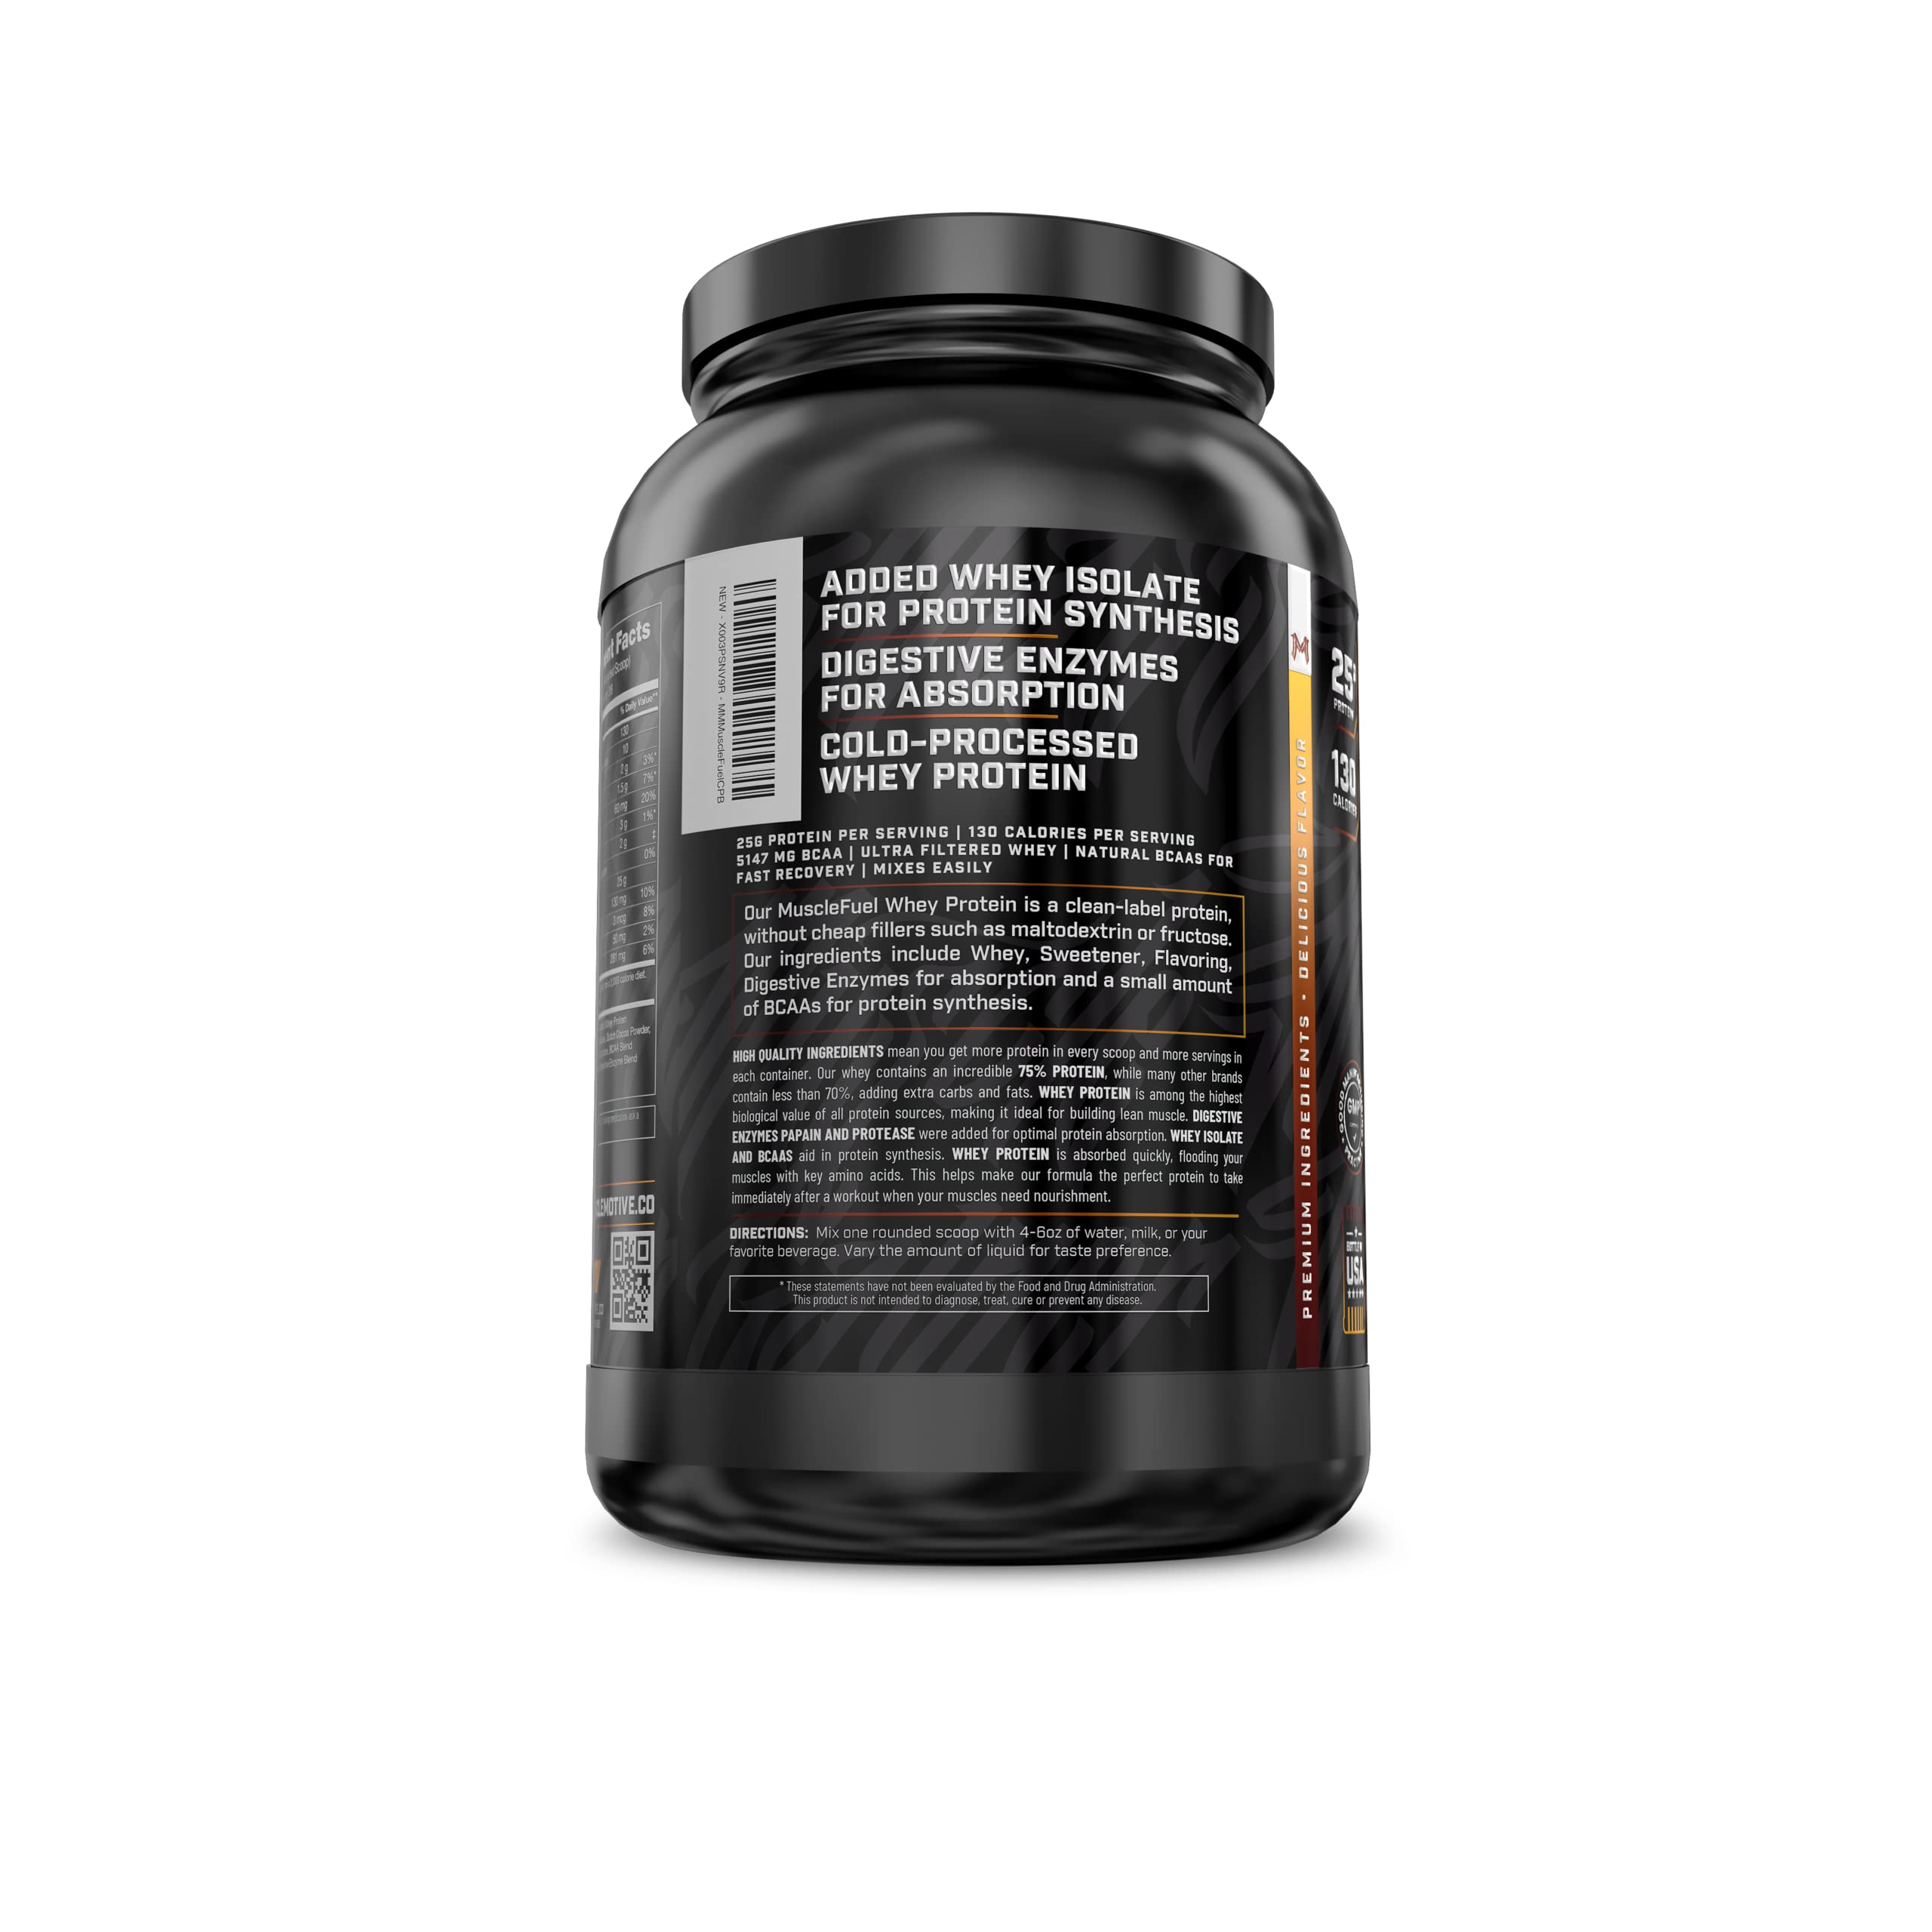 MuscleMotive MuscleFuel - 100% Whey Protein Powder with Isolate - 25g Protein Blend with BCAAs & Digestive Enzymes - Chocolate Peanut Butter Flavor - 2 LB